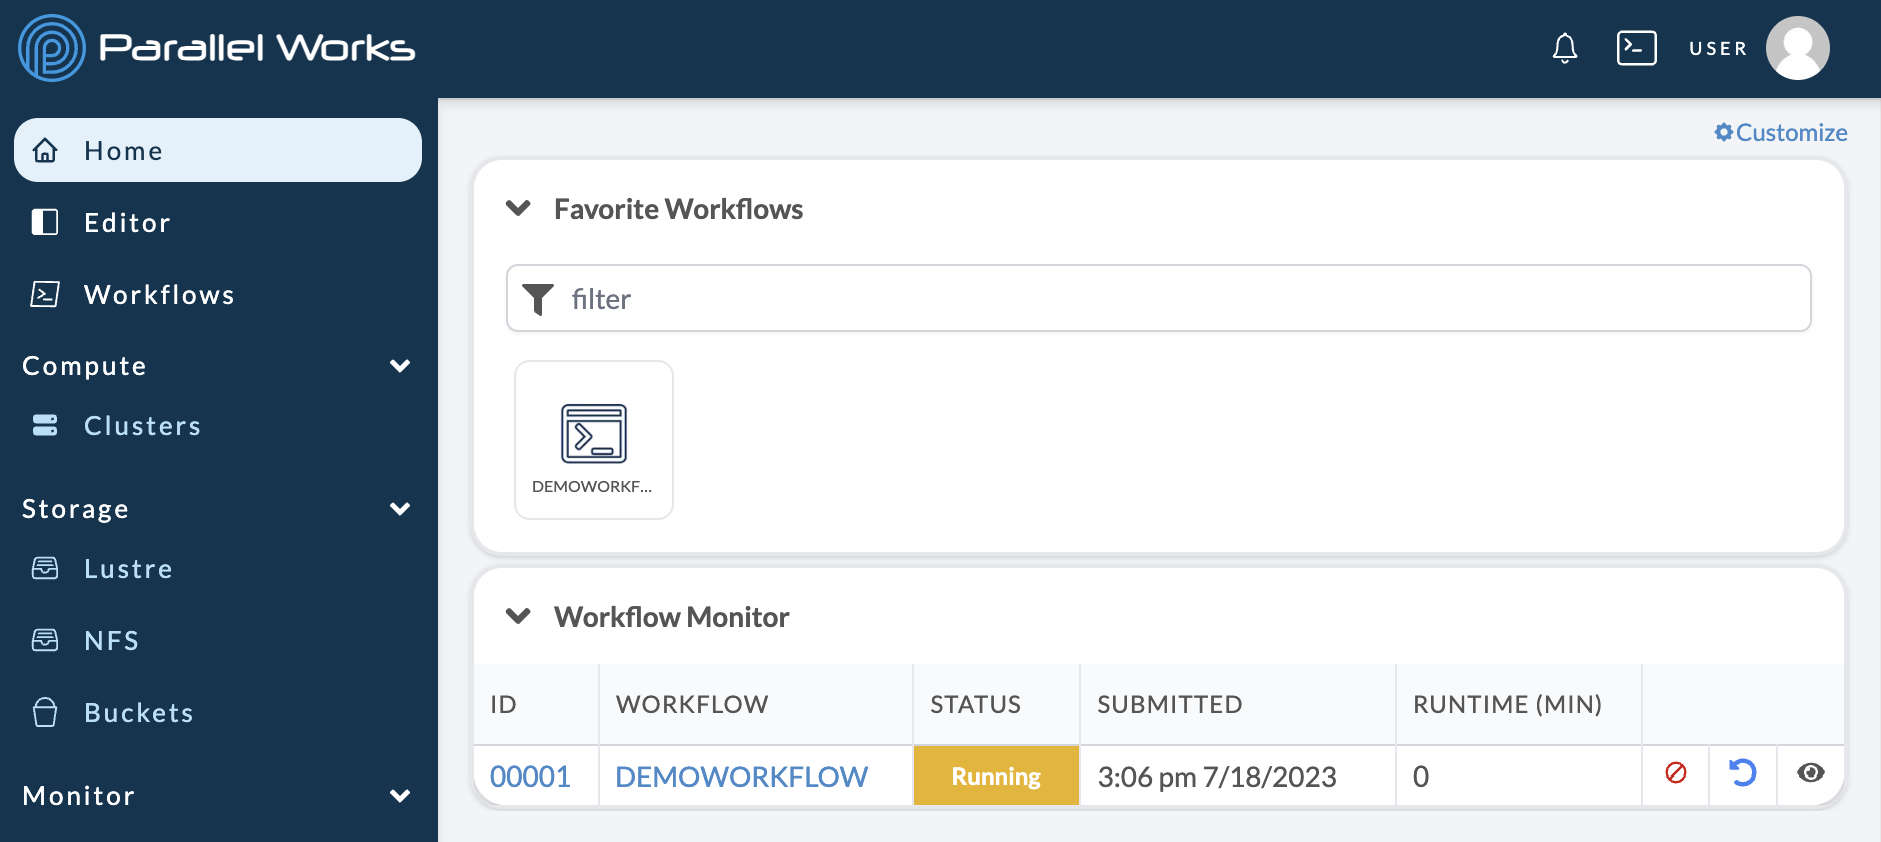 Screenshot of the Workflow Monitor on the Home page.